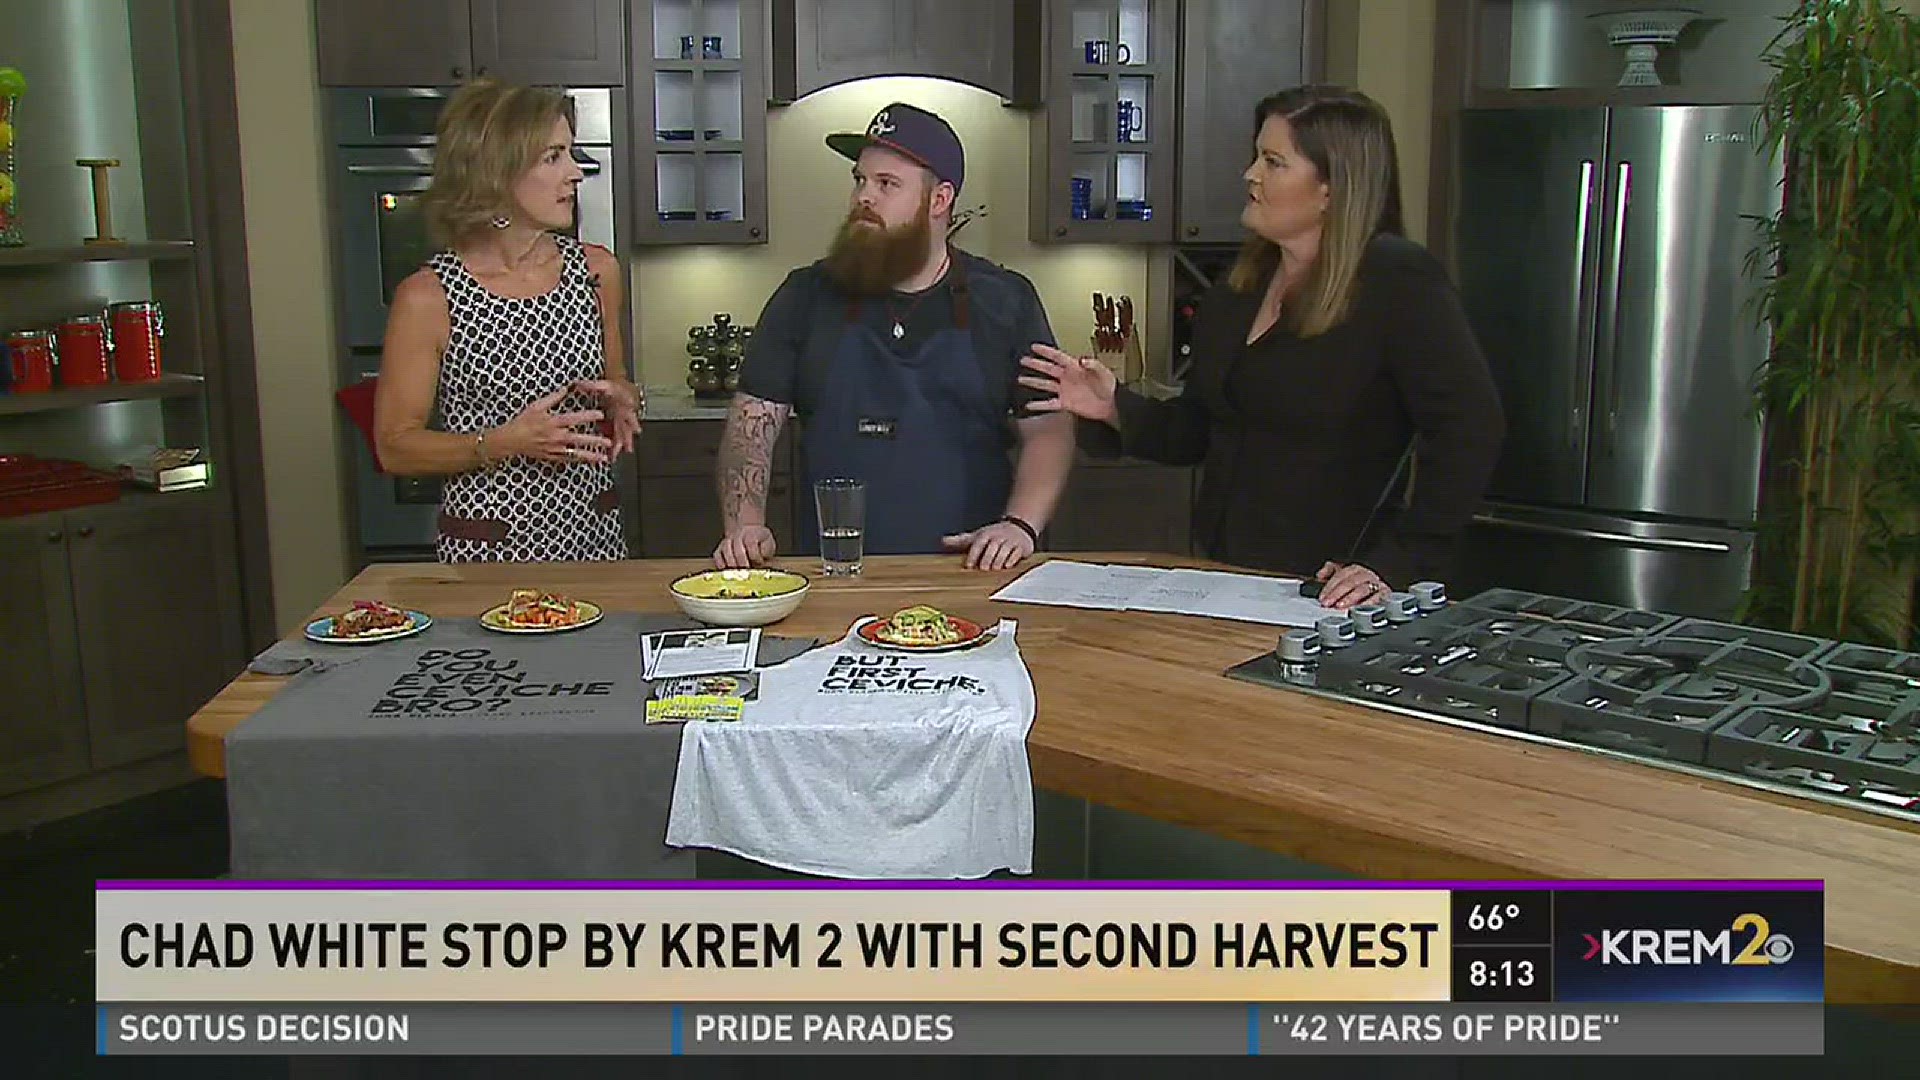 Chef Chad White shows off his ceviche dish on KREM 2